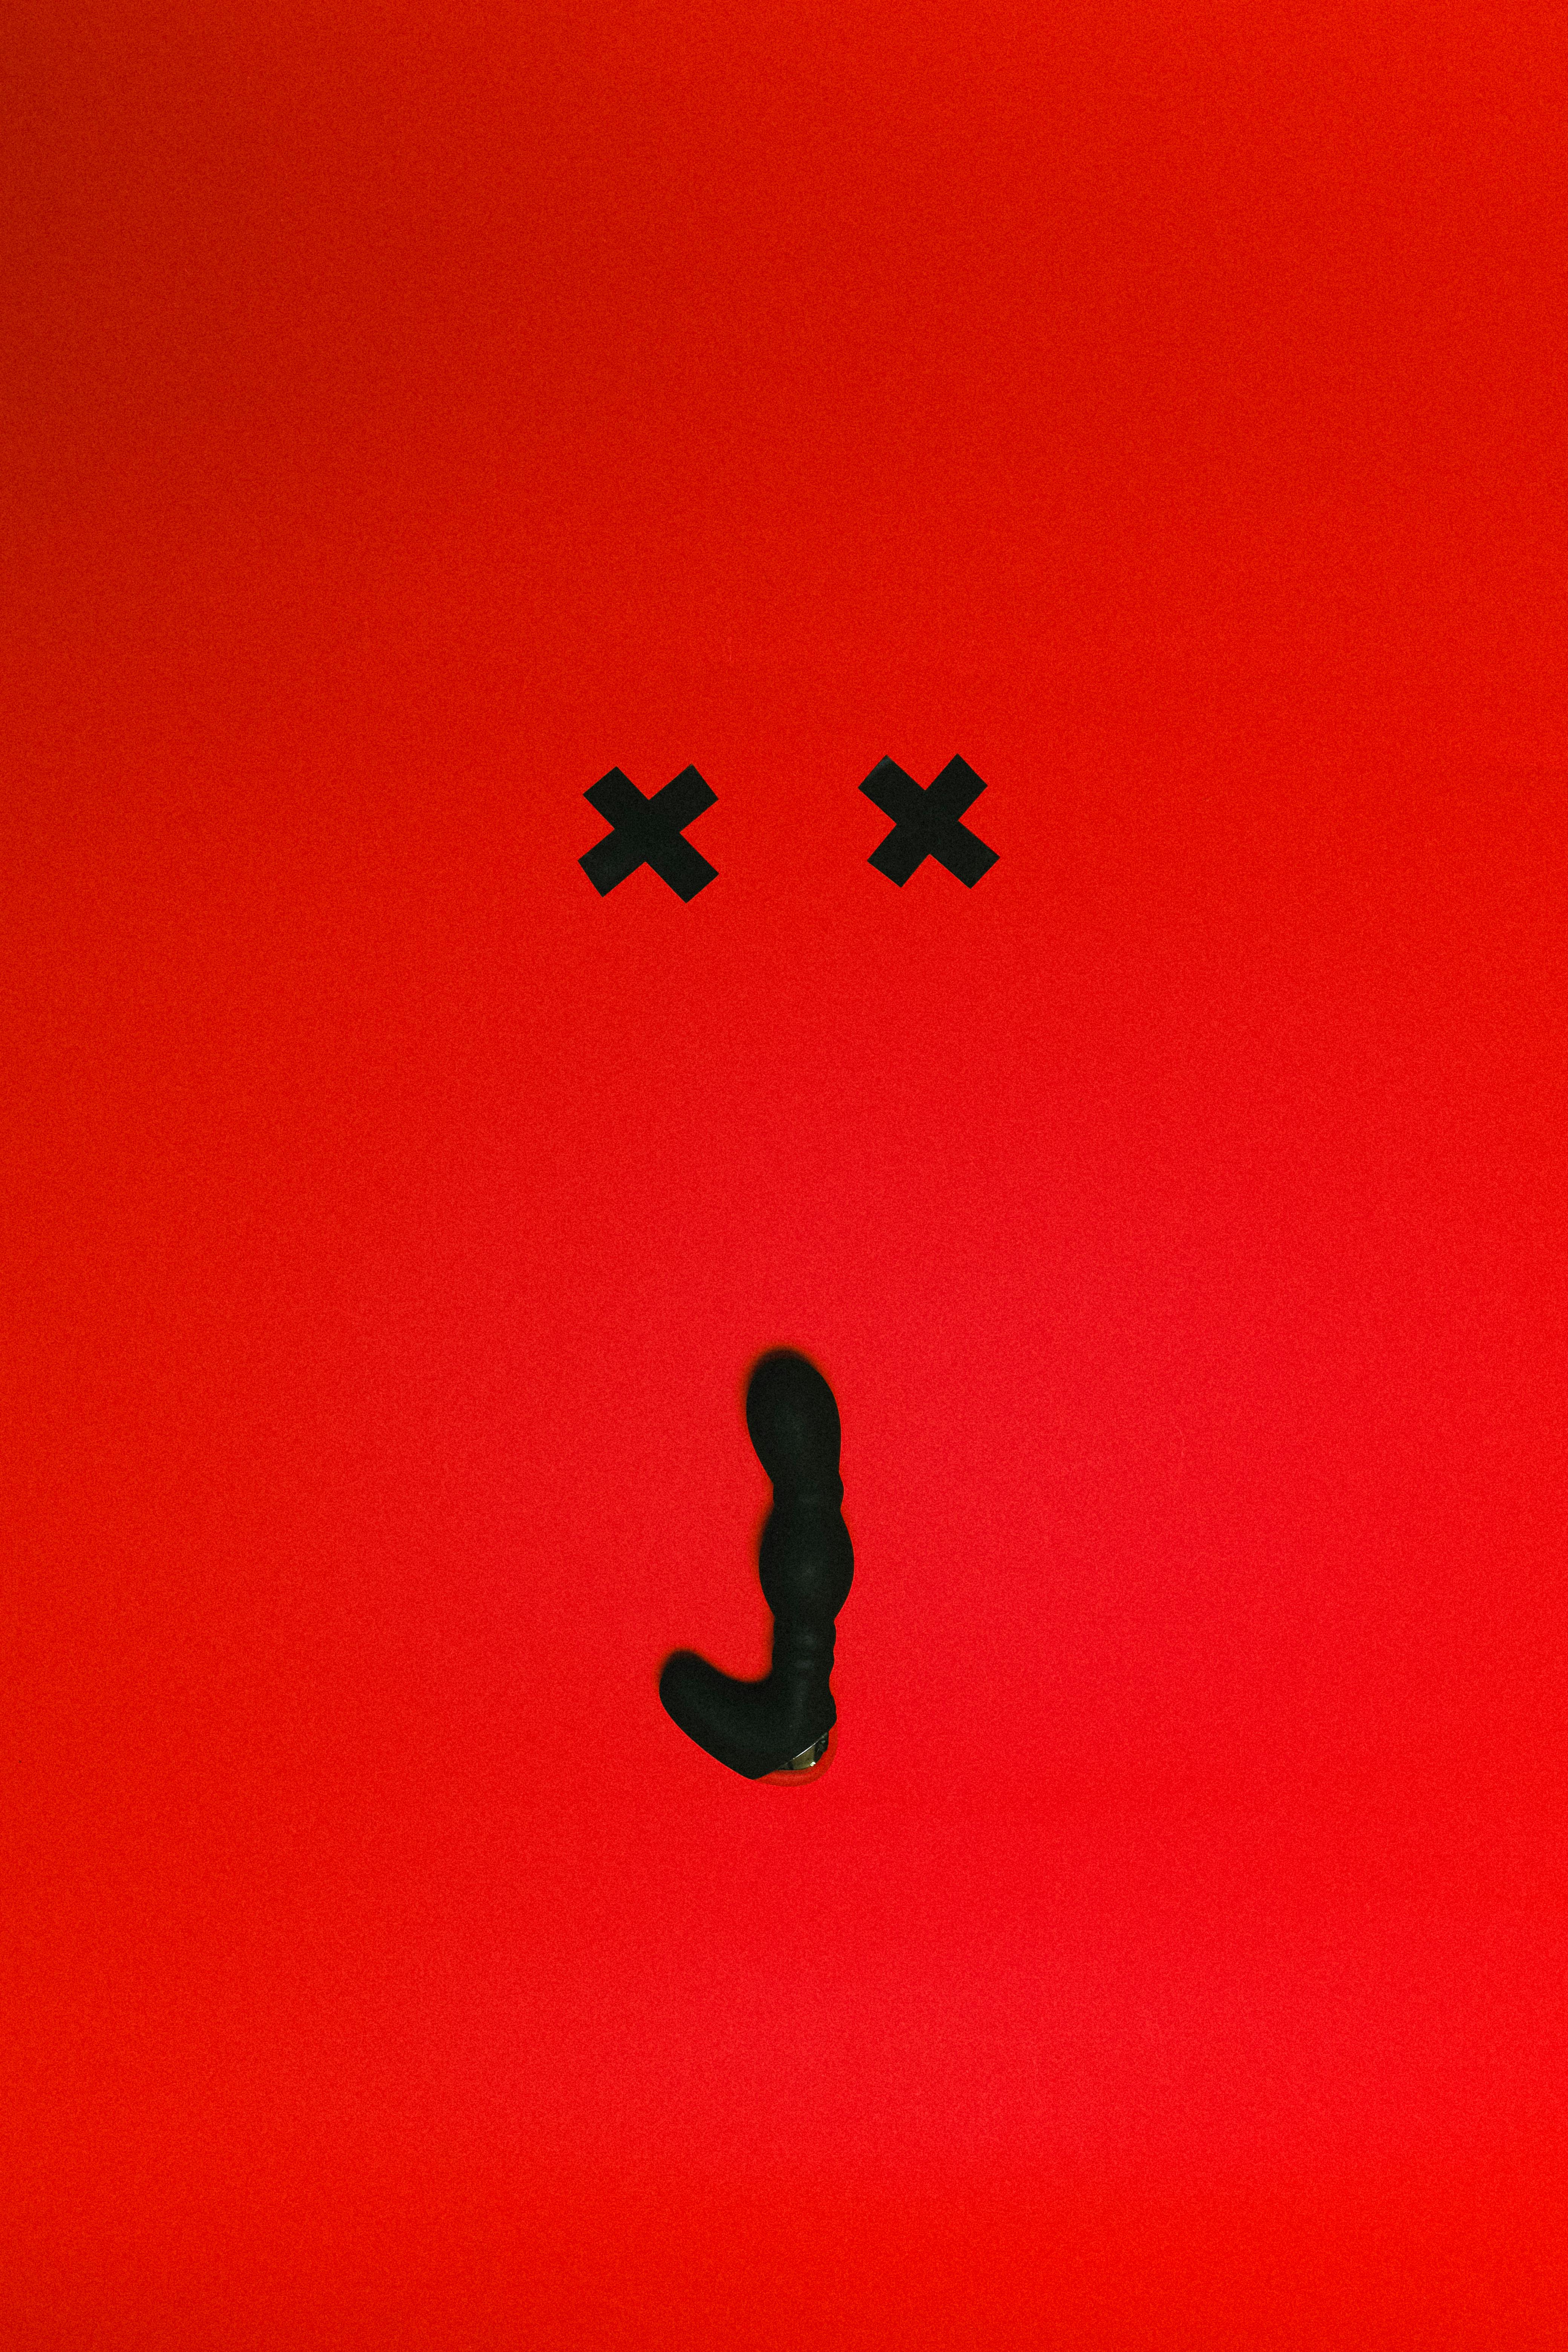 black sex toy on red background